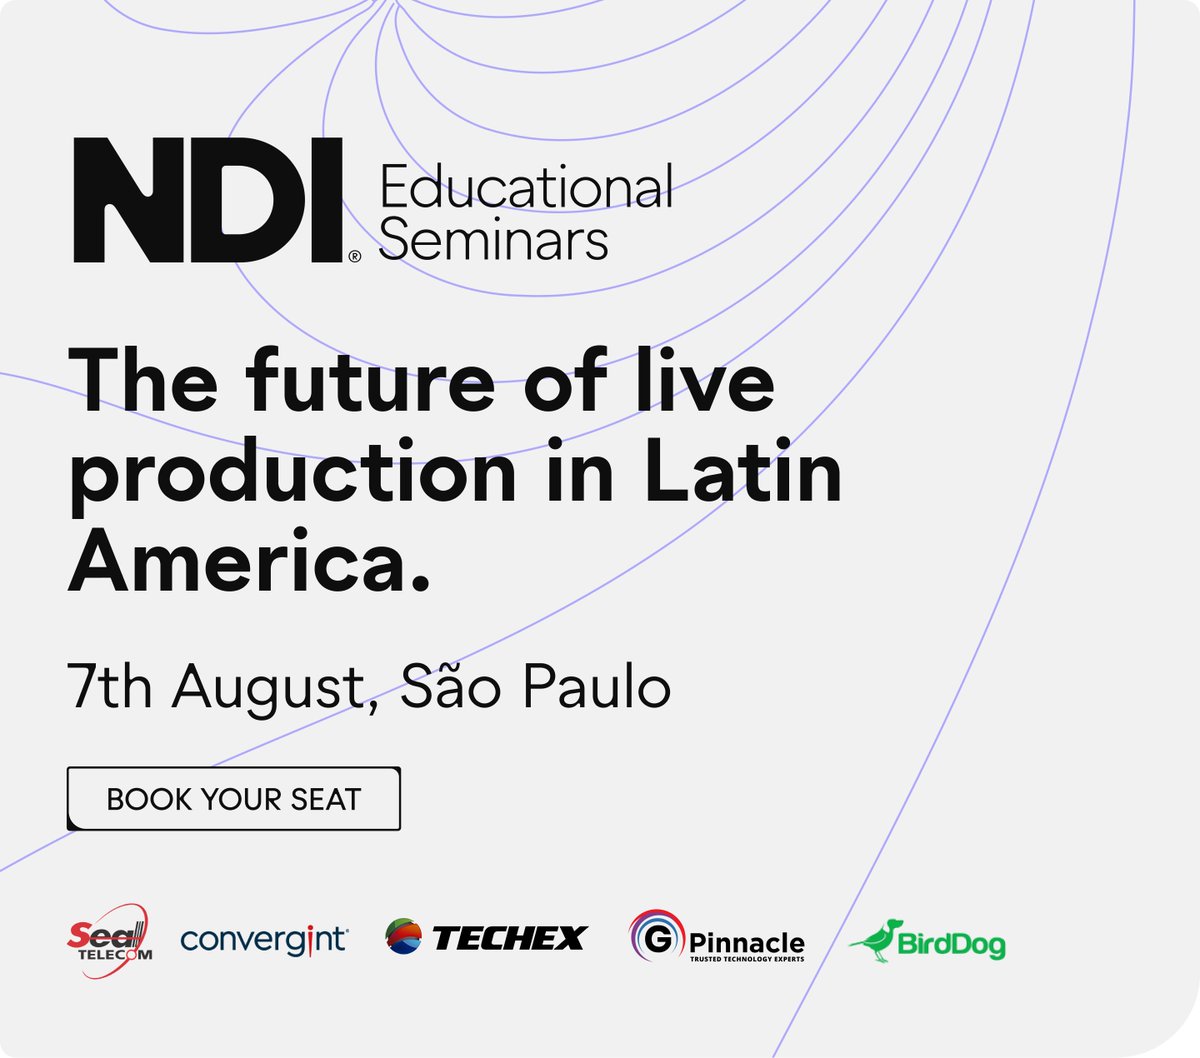 If you're a production manager, broadcast engineer, AV specialist, or just passionate about video in LATAM, join our educational seminar where we'll be talking about 'The Future of Live Production in Latin America'

Register here: ndi.video/events/the-fut…

#NDI #educationalseminar